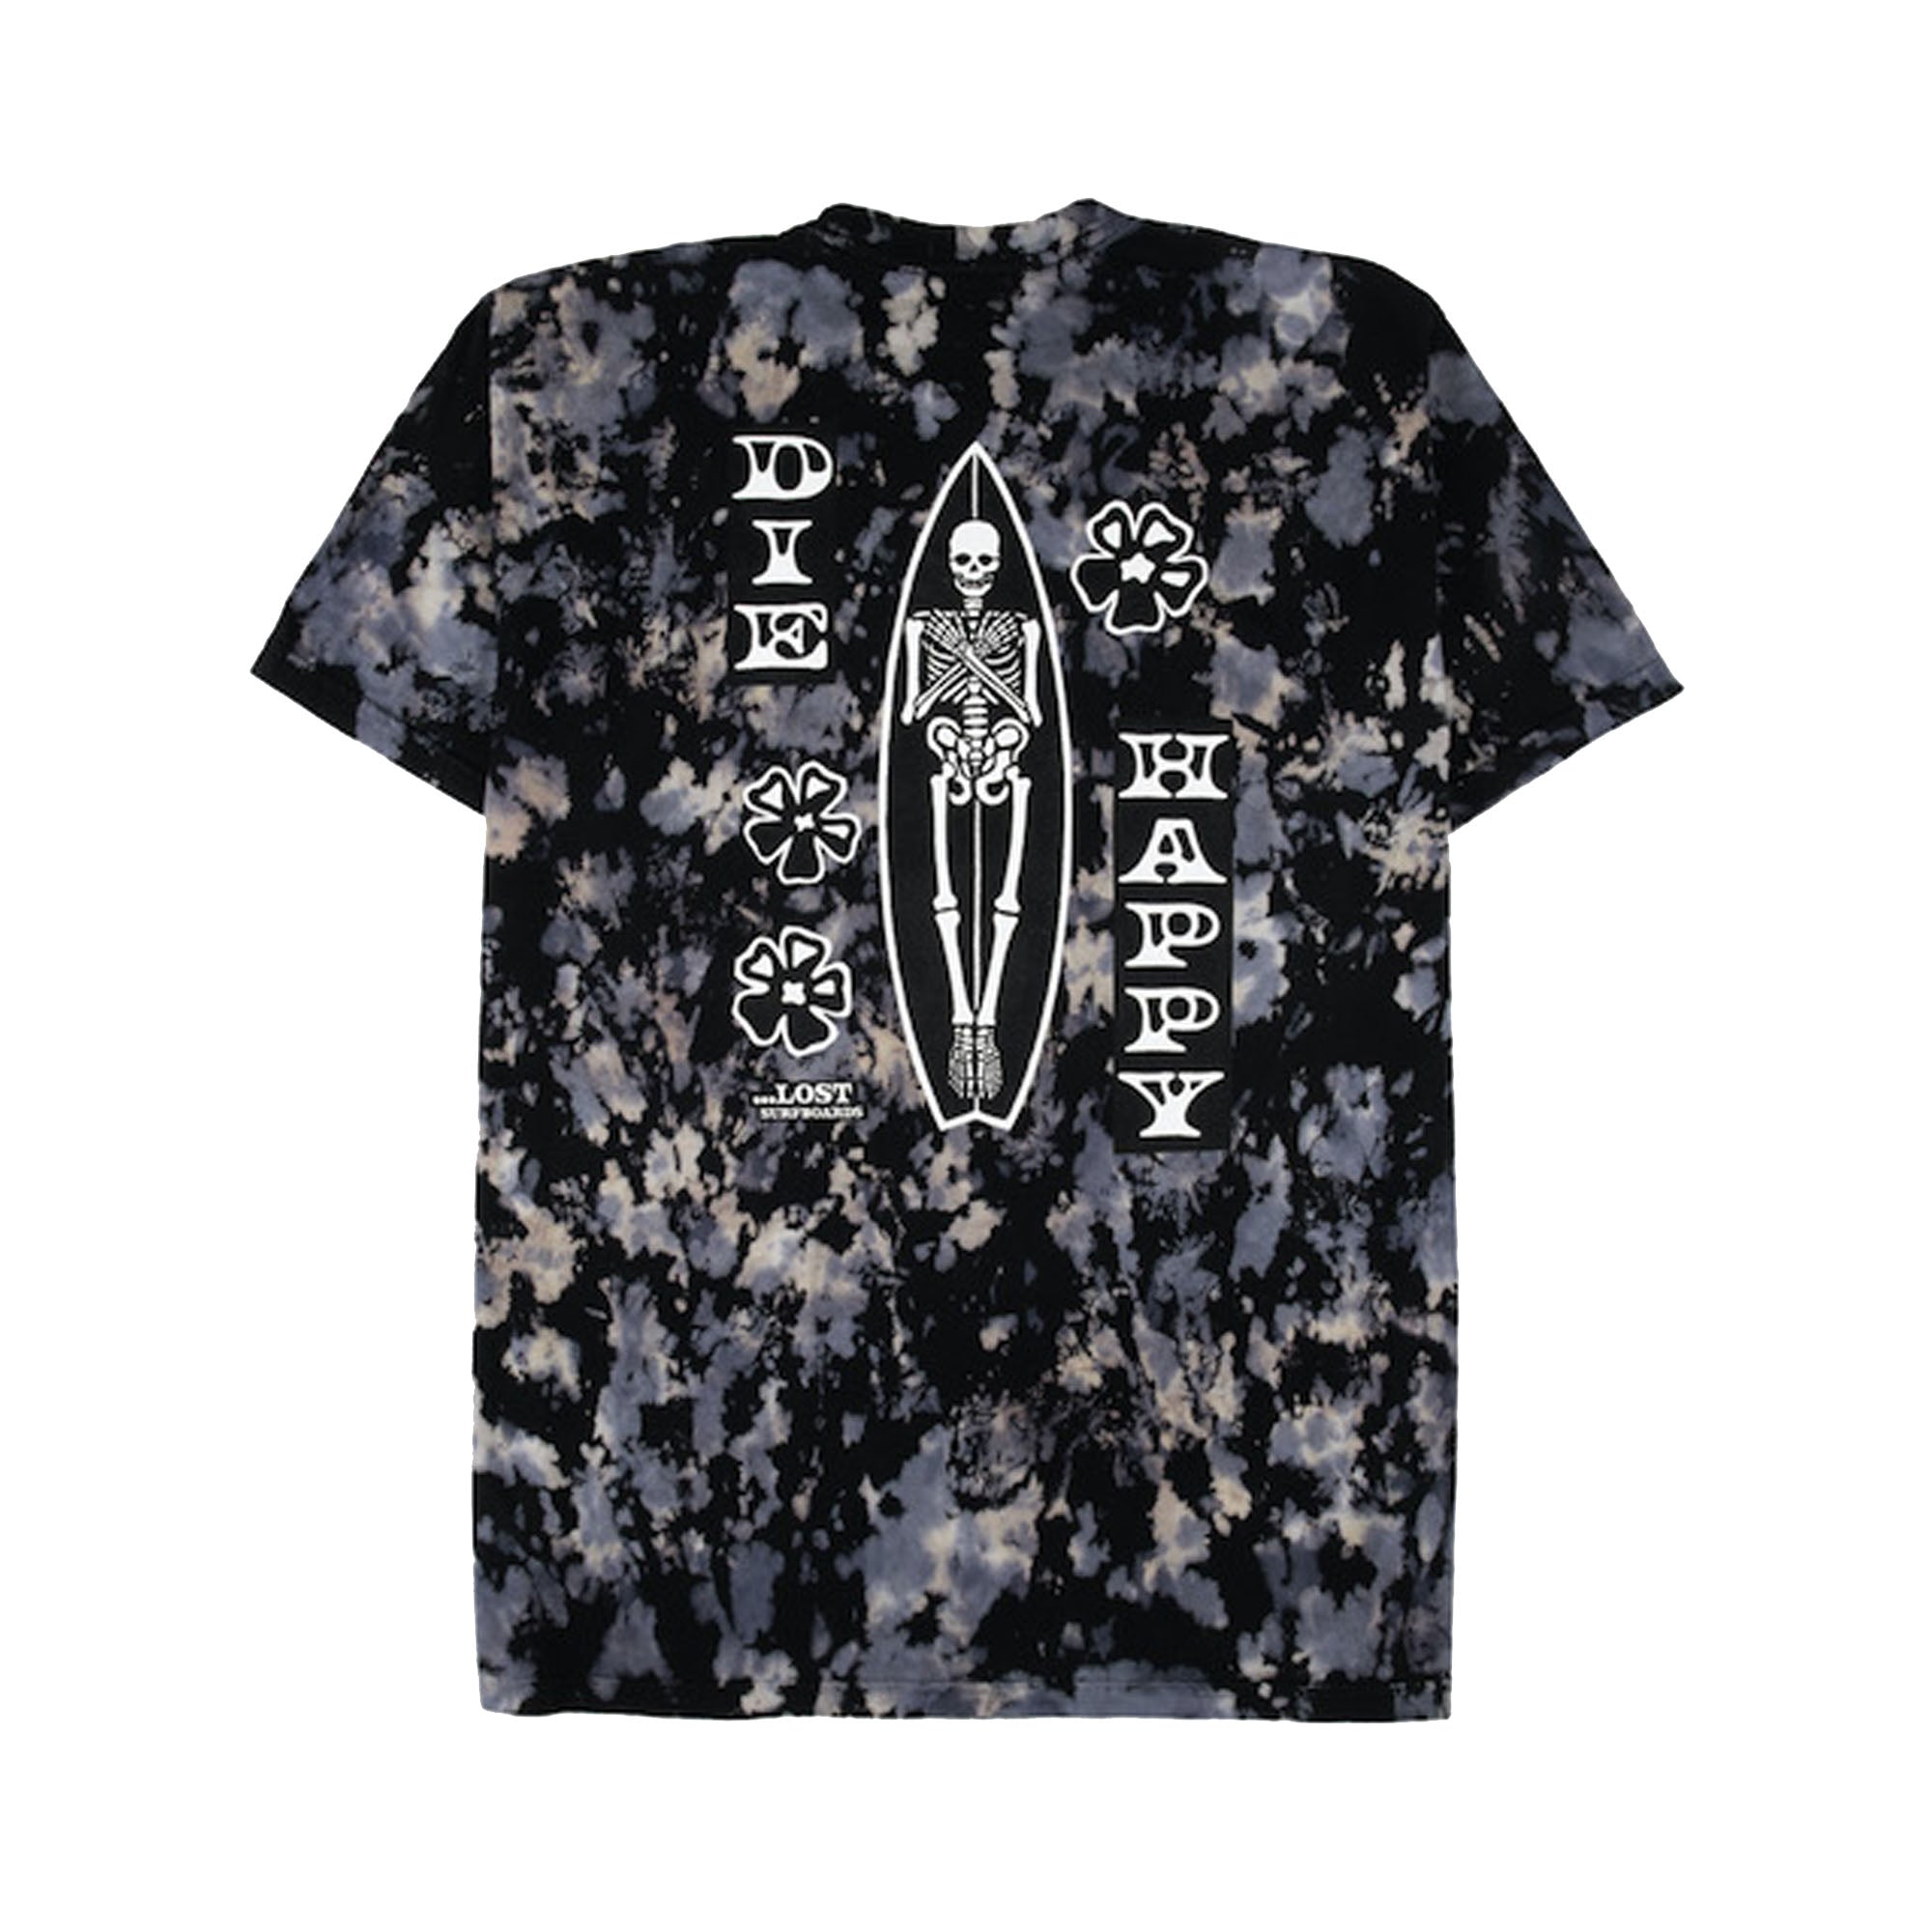 Lost Clasher Wash Men's S/S T-Shirt